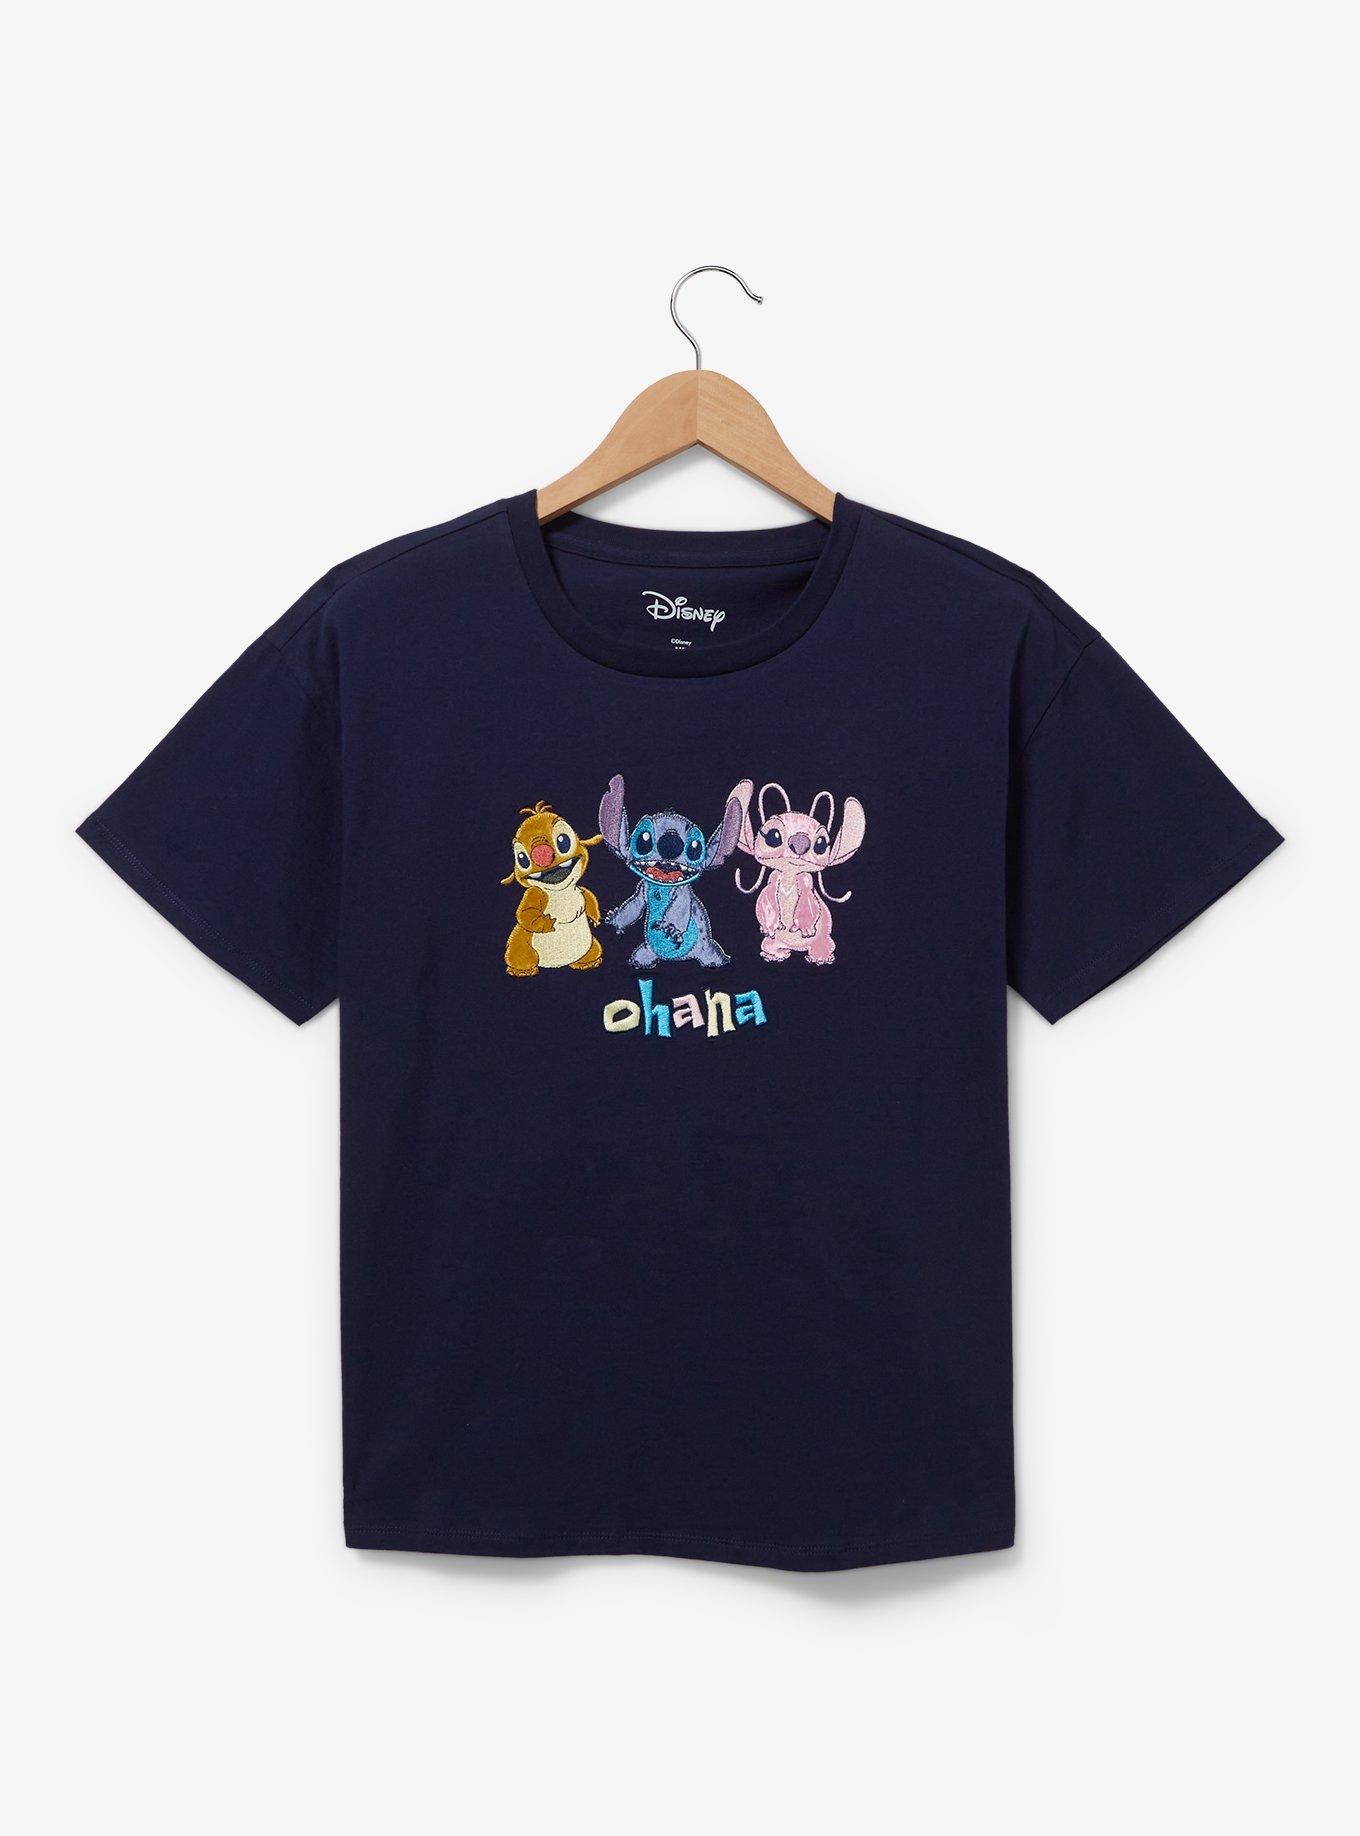 Disney Lilo & Stitch Reuben, Angel, and Stitch Ohana Embroidered Women's T-Shirt — BoxLunch Exclusive, NAVY, hi-res